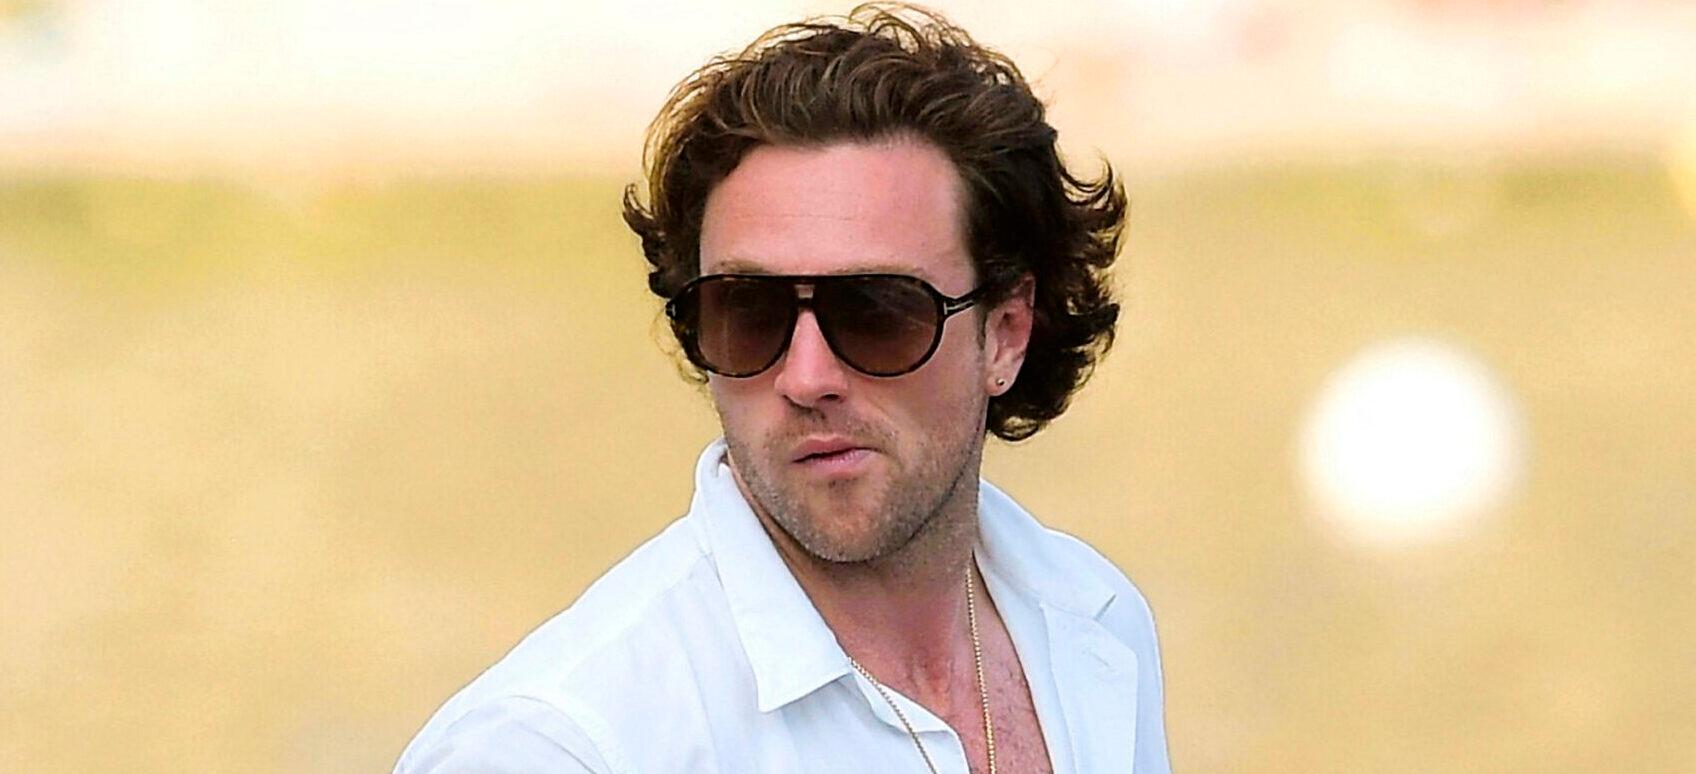 Aaron Taylor-Johnson and Sam Taylor-Johnson are seen leaving Elton John's luxury yacht in the South of France